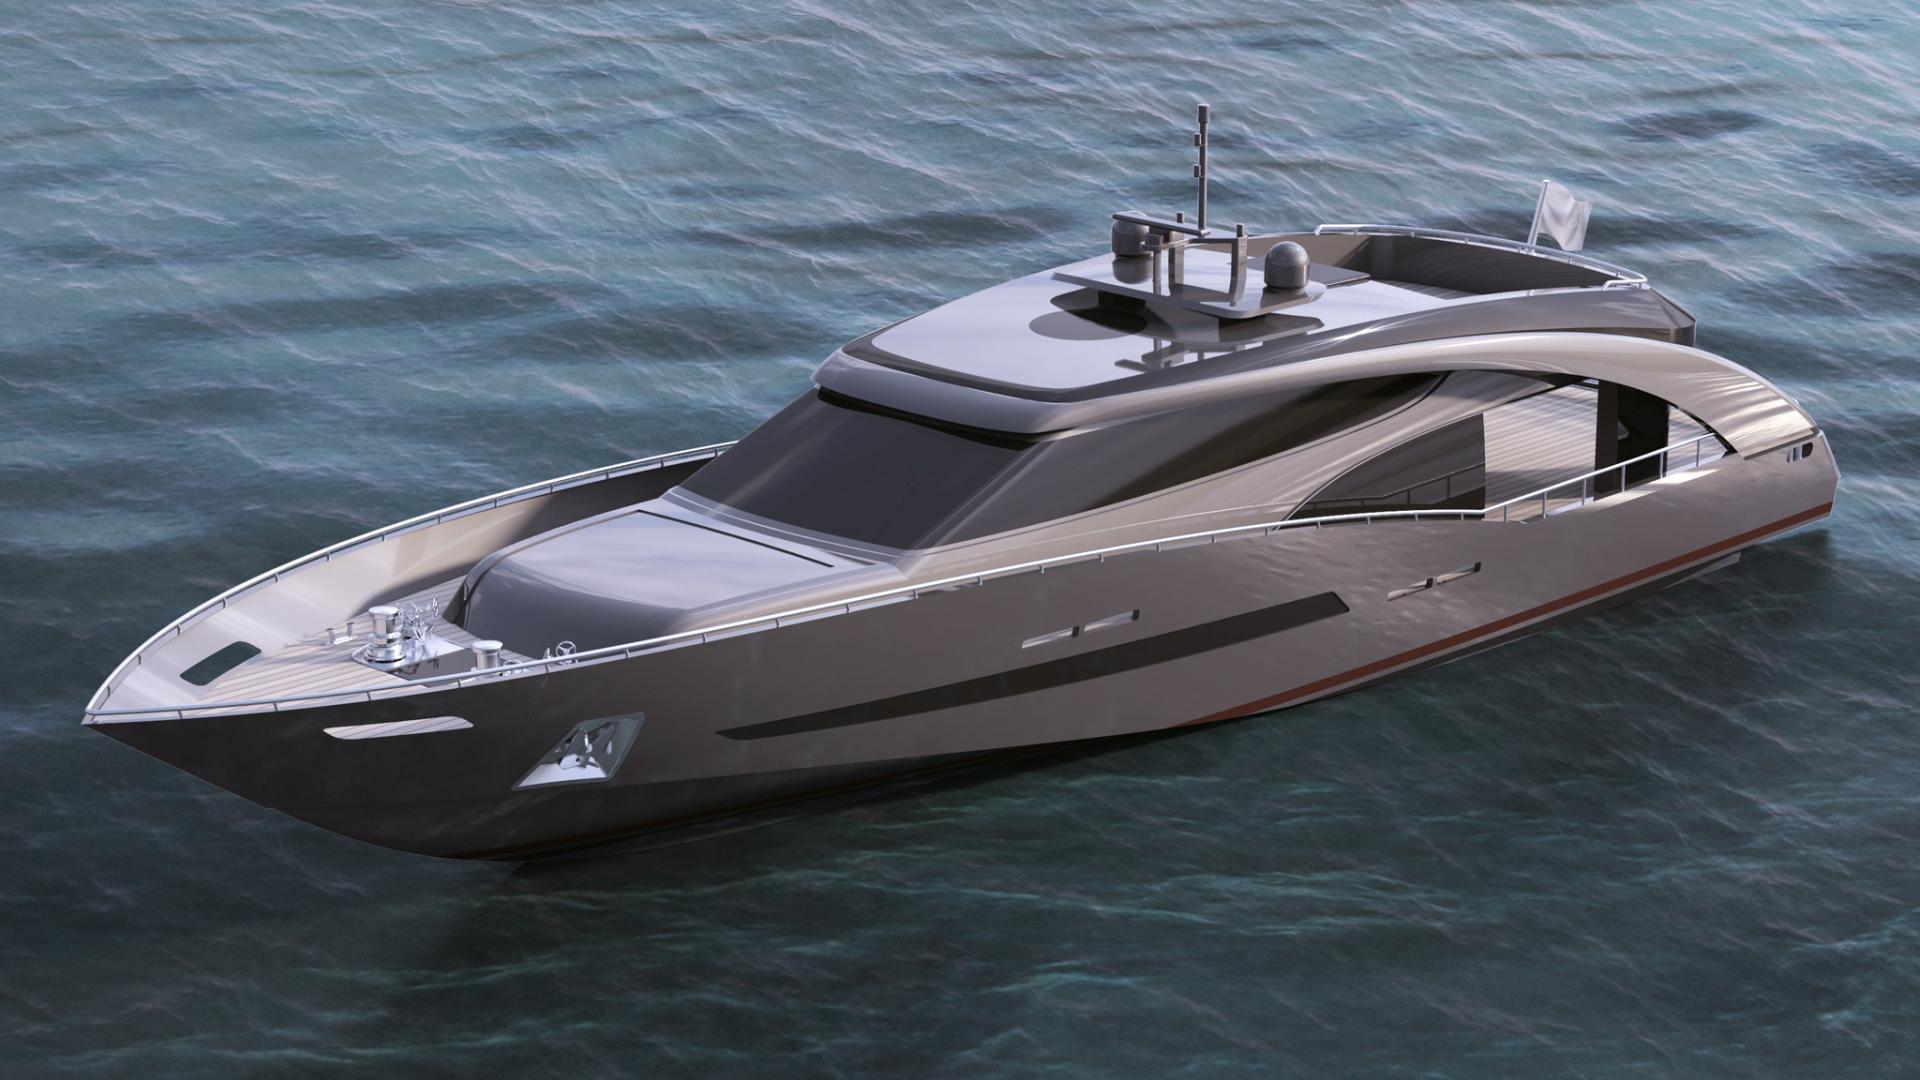 CCN announces the sale of a new Fuoriserie yacht to an Italian owner